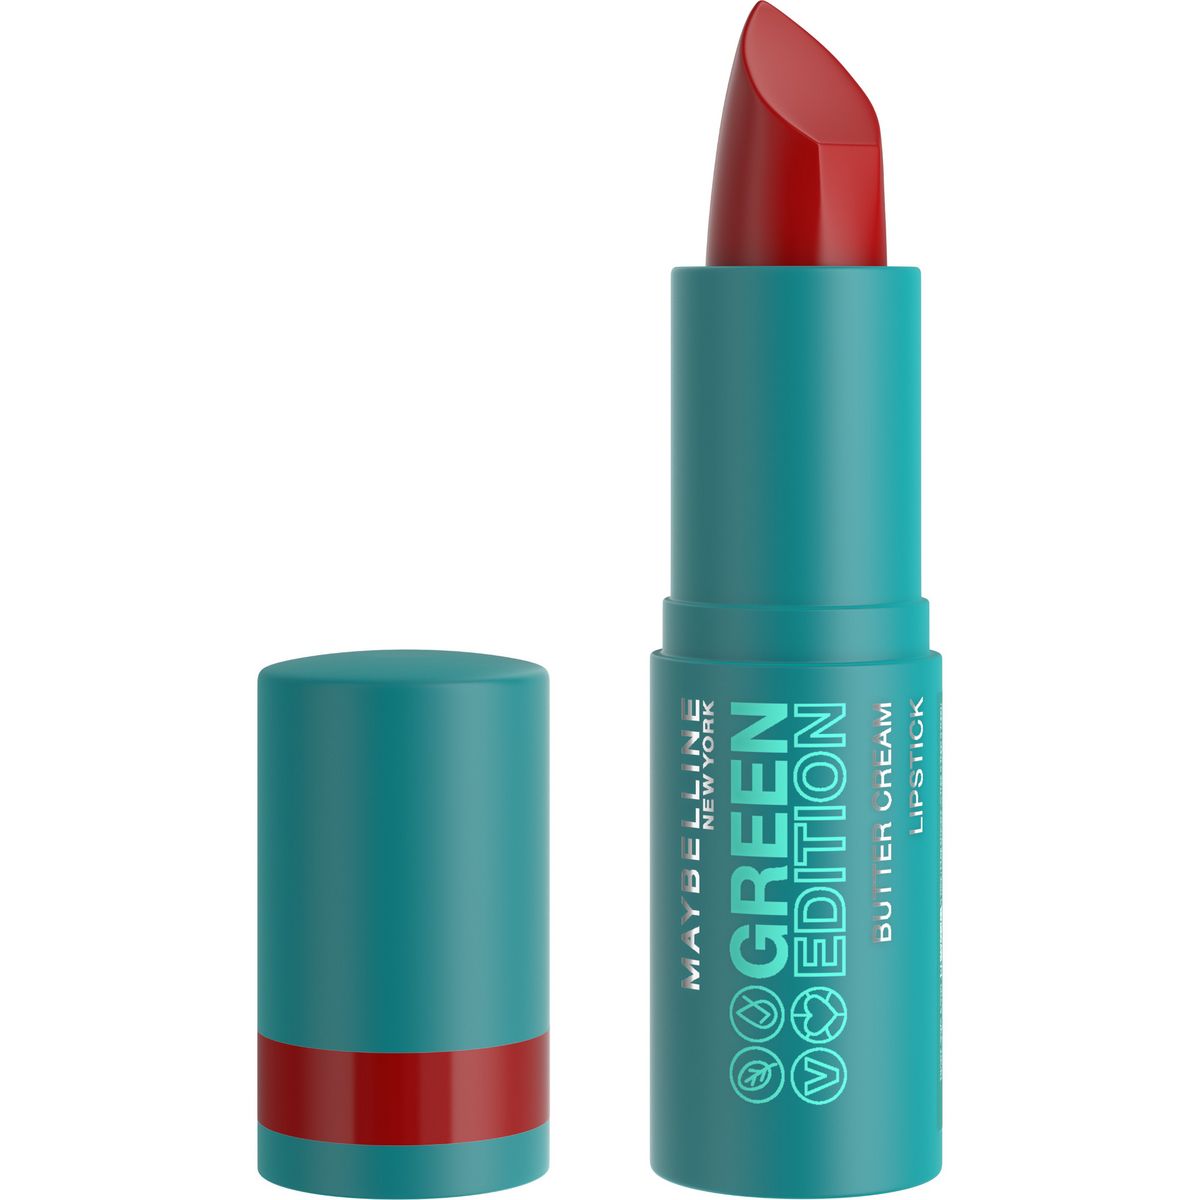 MAYBELLINE Green Edition Rouge à lèvres 018 musk 1 pièce